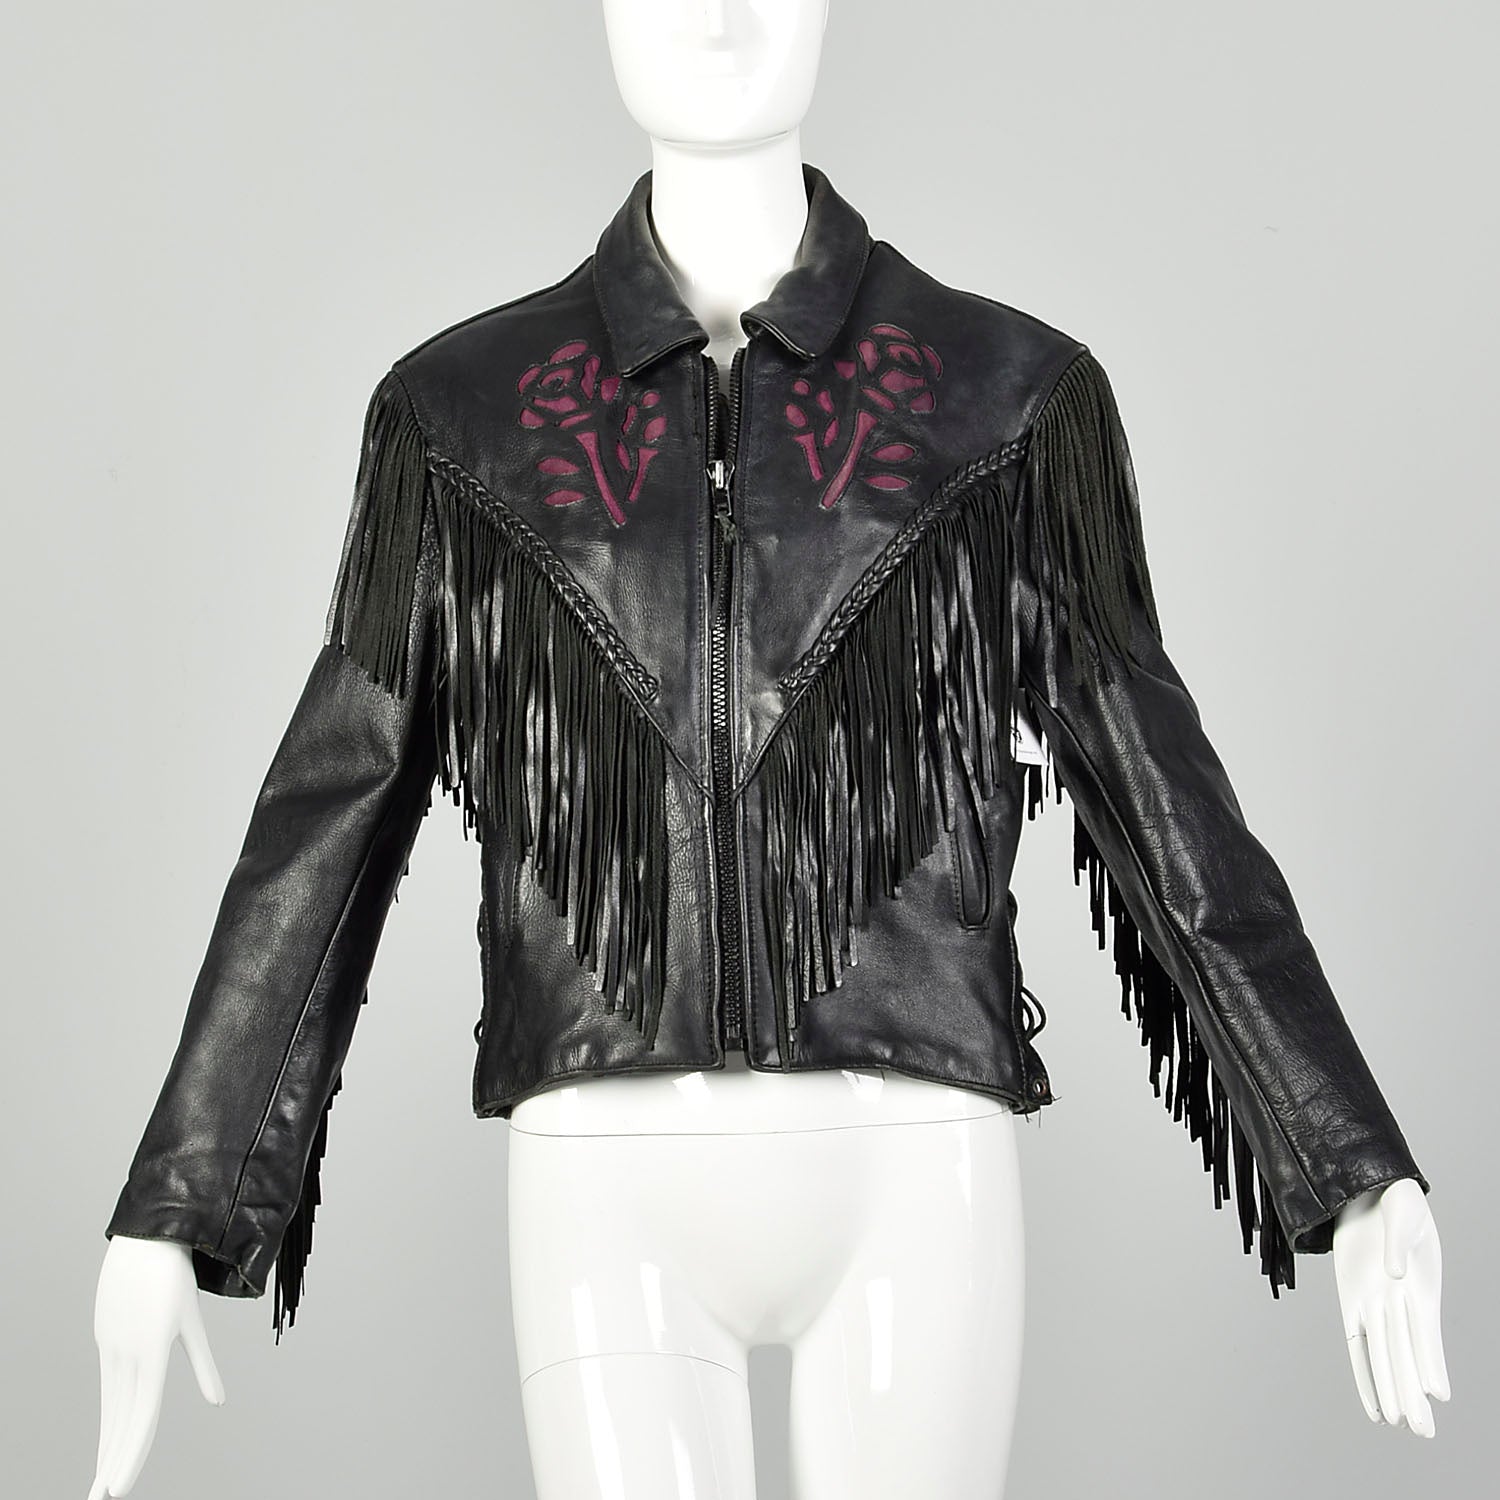 Small 1980s Black Leather Biker Jacket Fringe Purple Rose Inlays Zip Out Lining